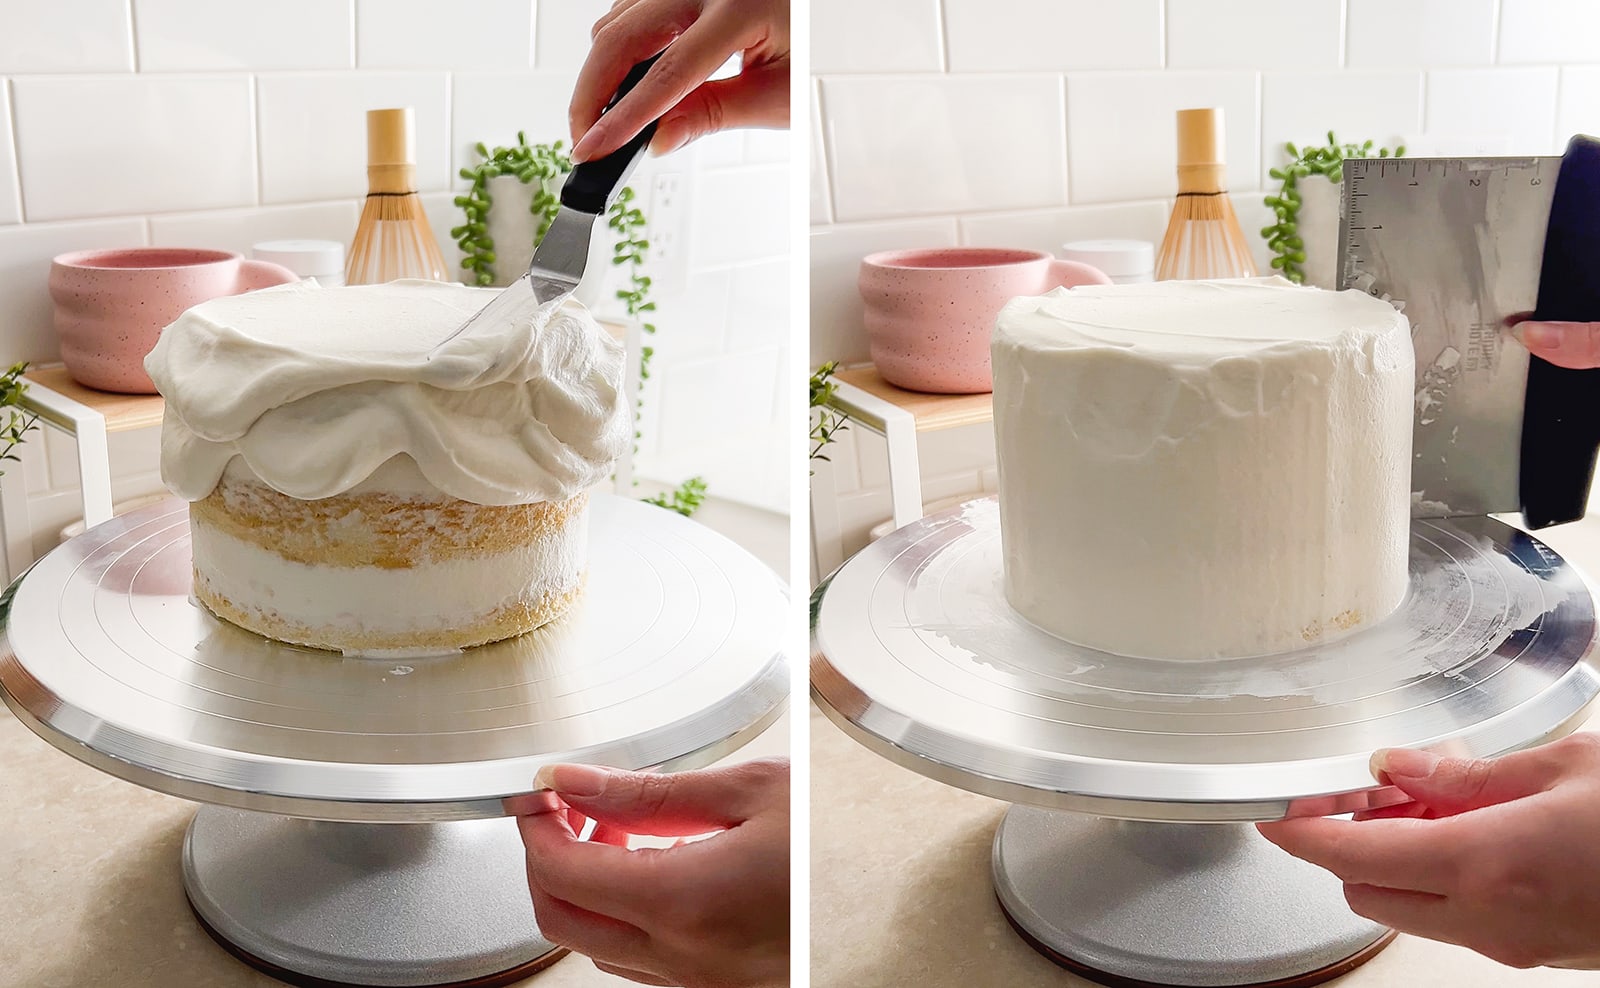 Left to right: hand holding spatula spreading whipped cream on top of cake, scraping excess whipped cream off cake with a bench scraper.